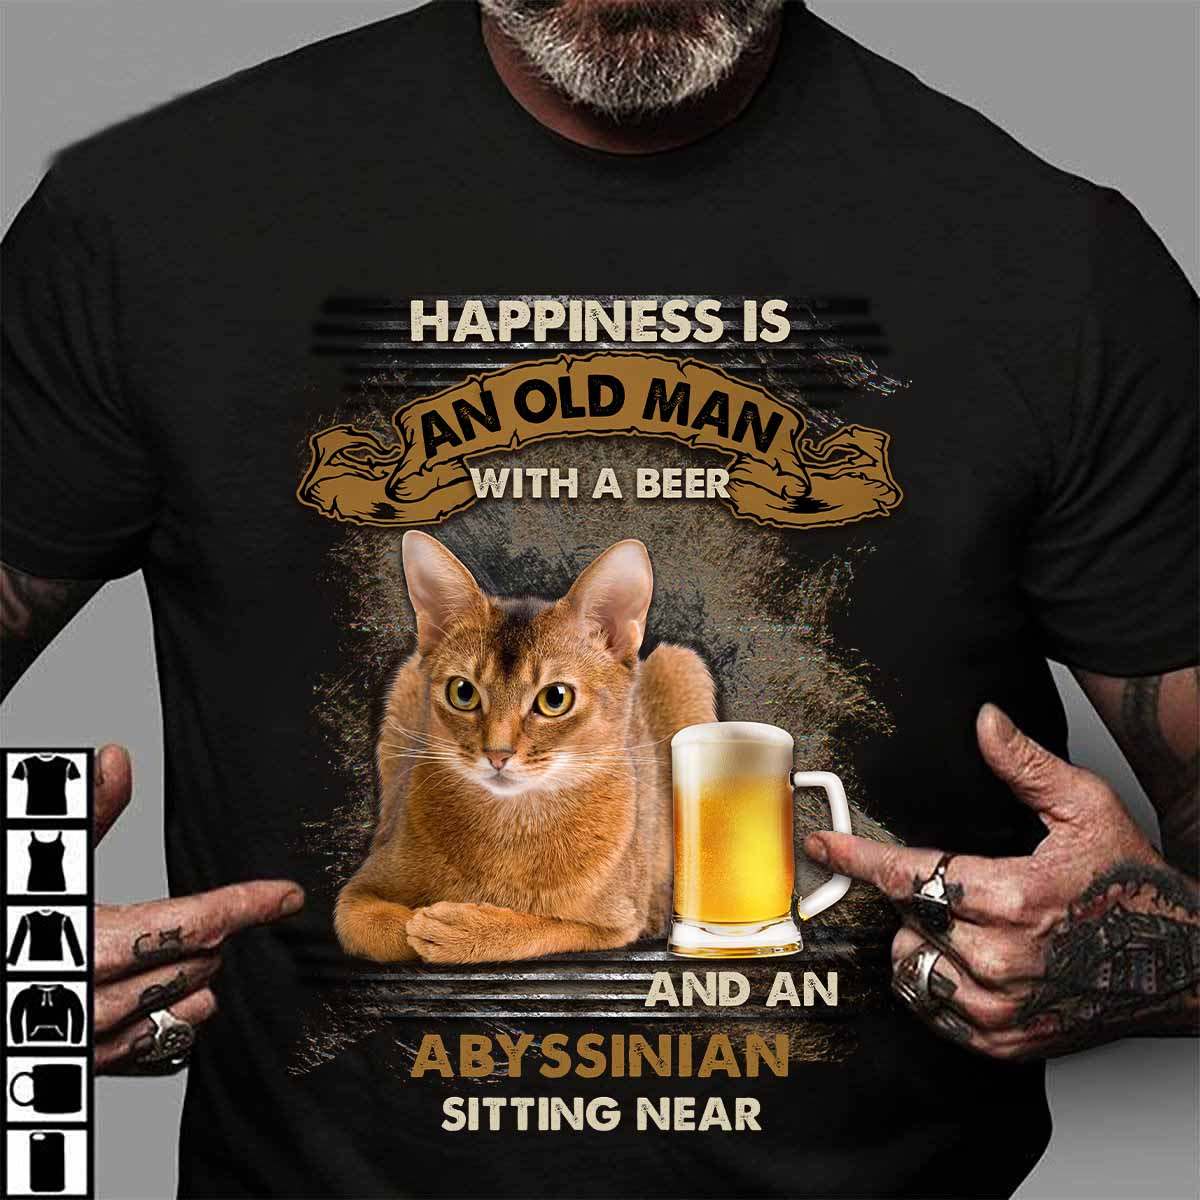 Happiness is an old man with a beer and an Abyssinian sitting near